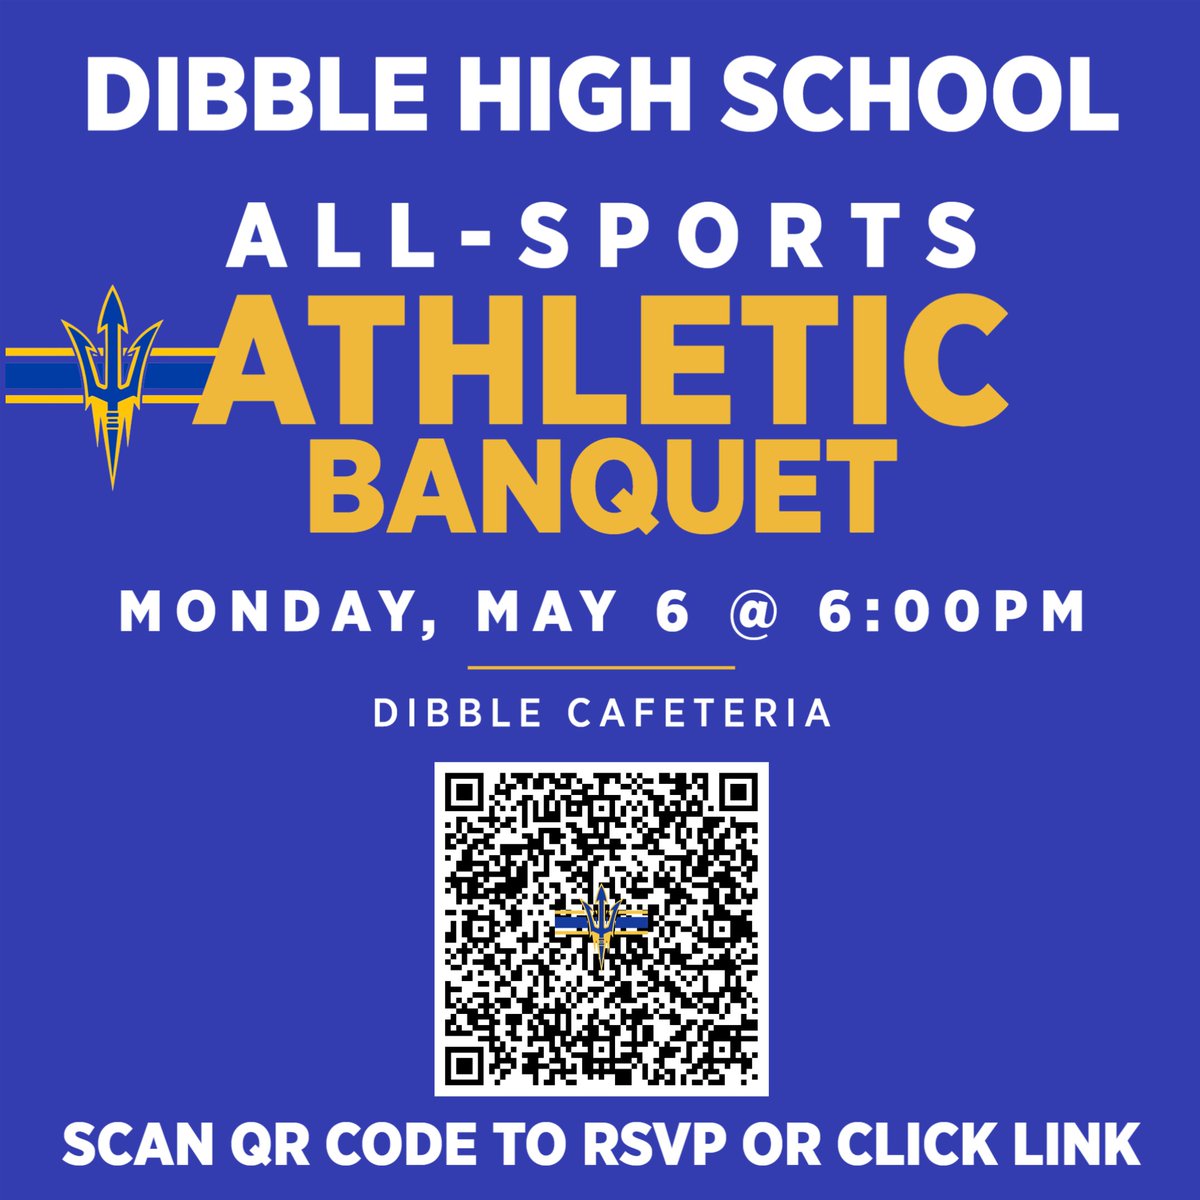 If you have not already, please RSVP. This is for HS Athletes and their families only. docs.google.com/forms/d/e/1FAI…